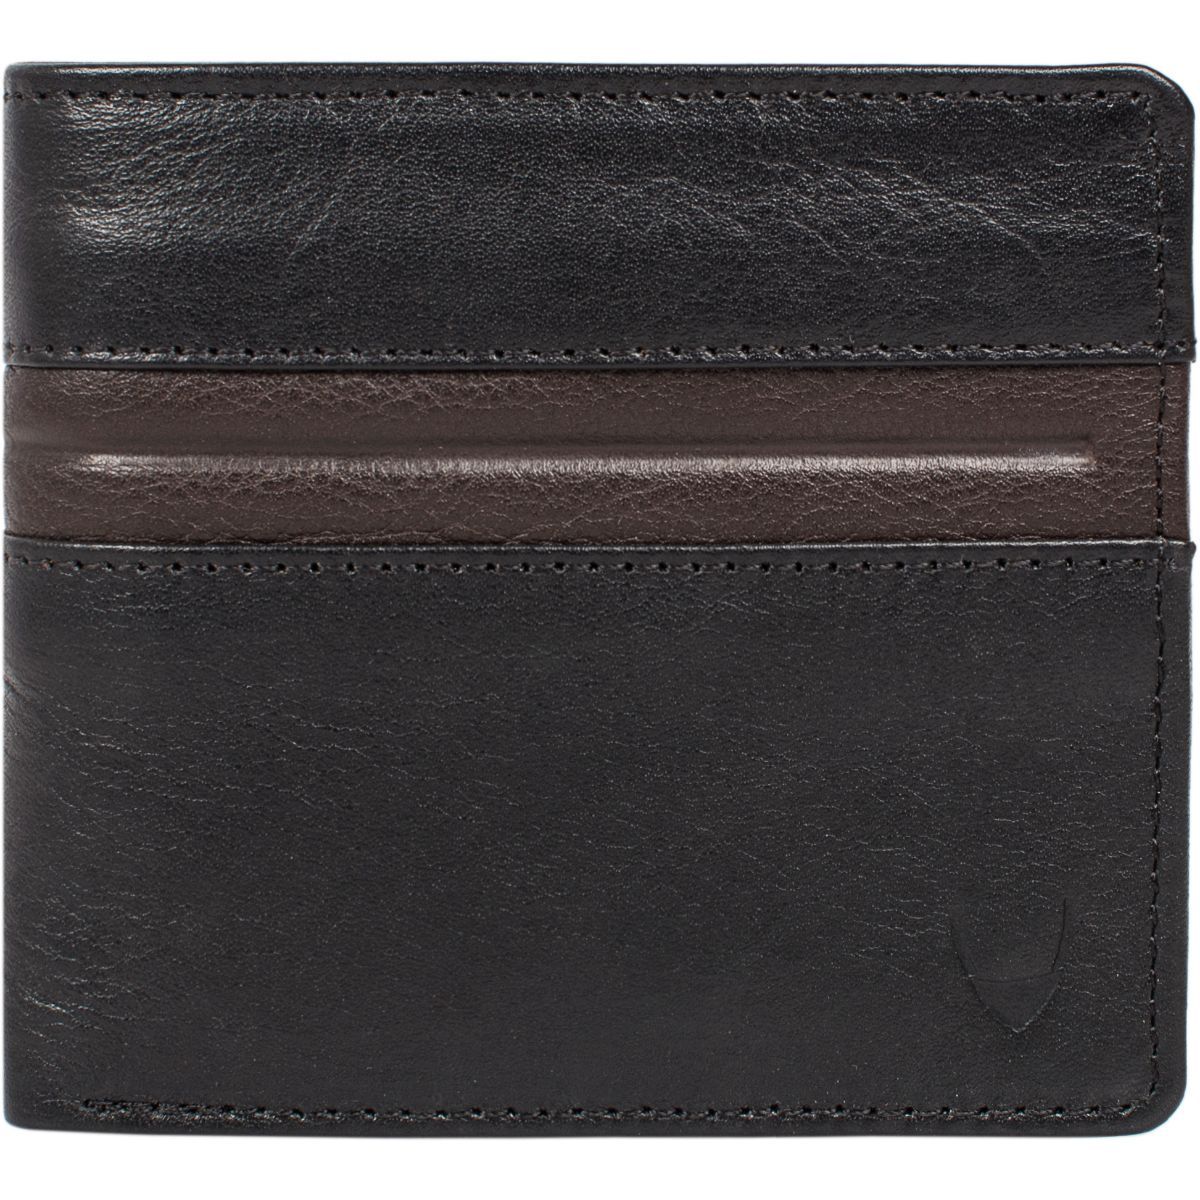 Aldo Printed Brown Wallet (Brown) At Nykaa, Best Beauty Products Online